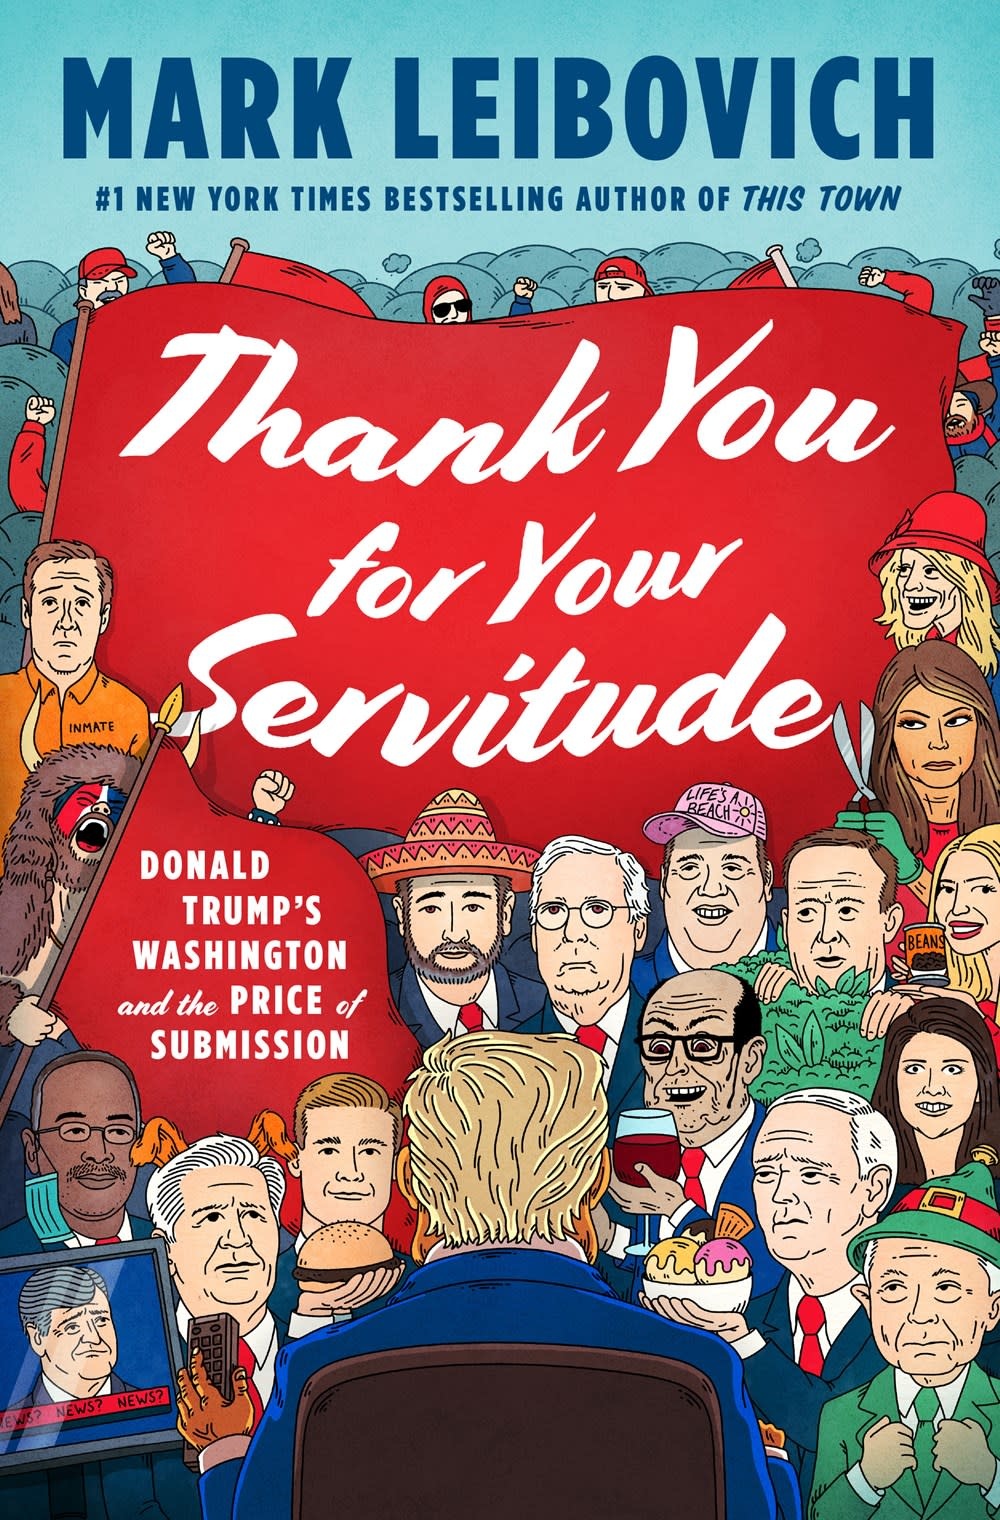 book review thank you for your servitude